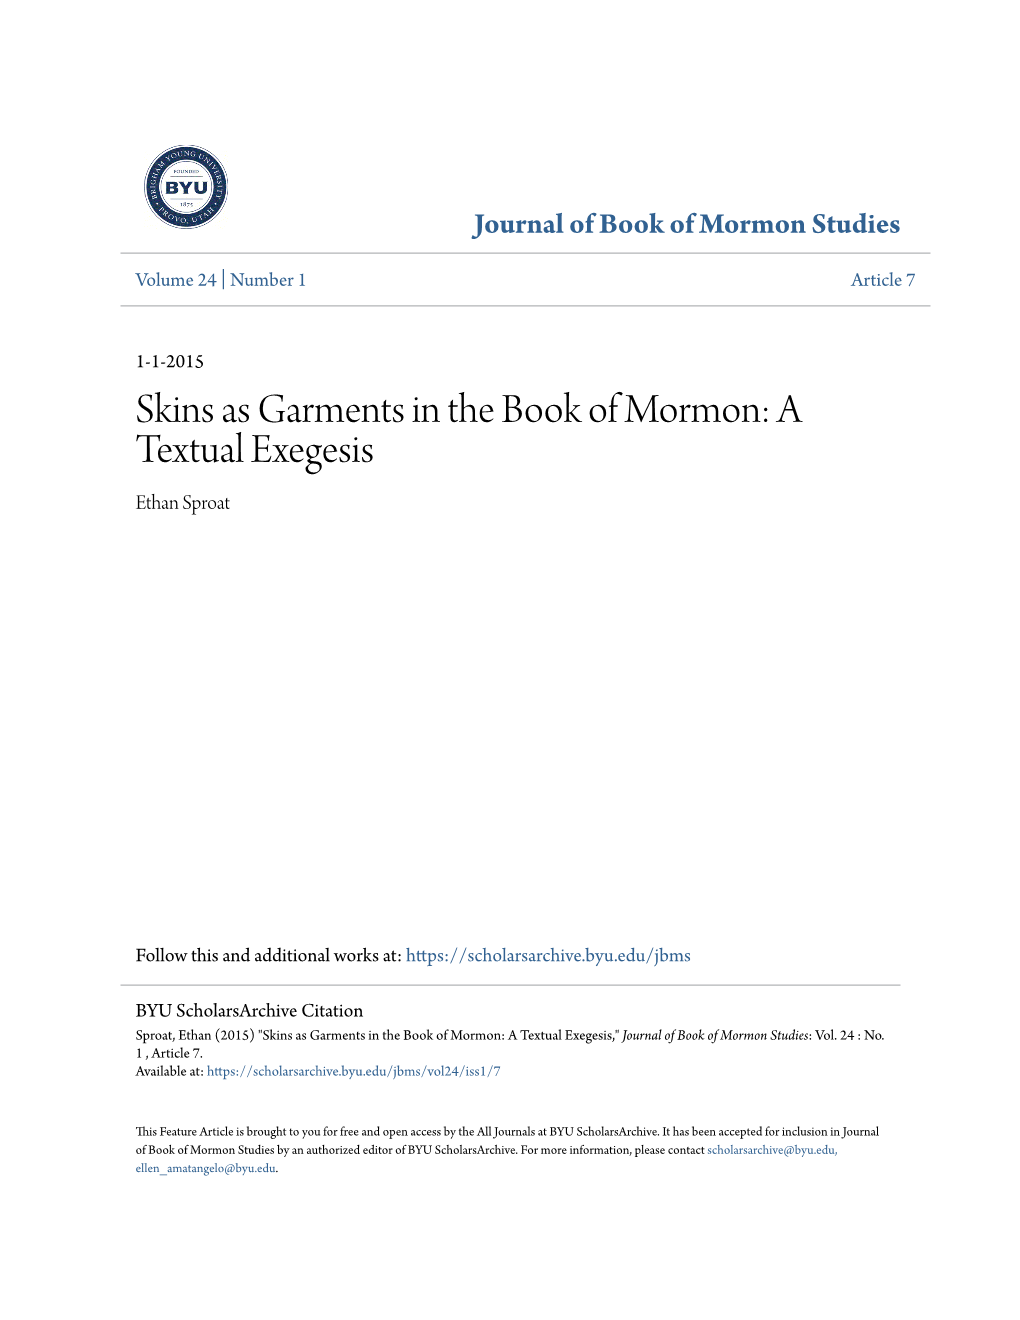 Skins As Garments in the Book of Mormon: a Textual Exegesis Ethan Sproat